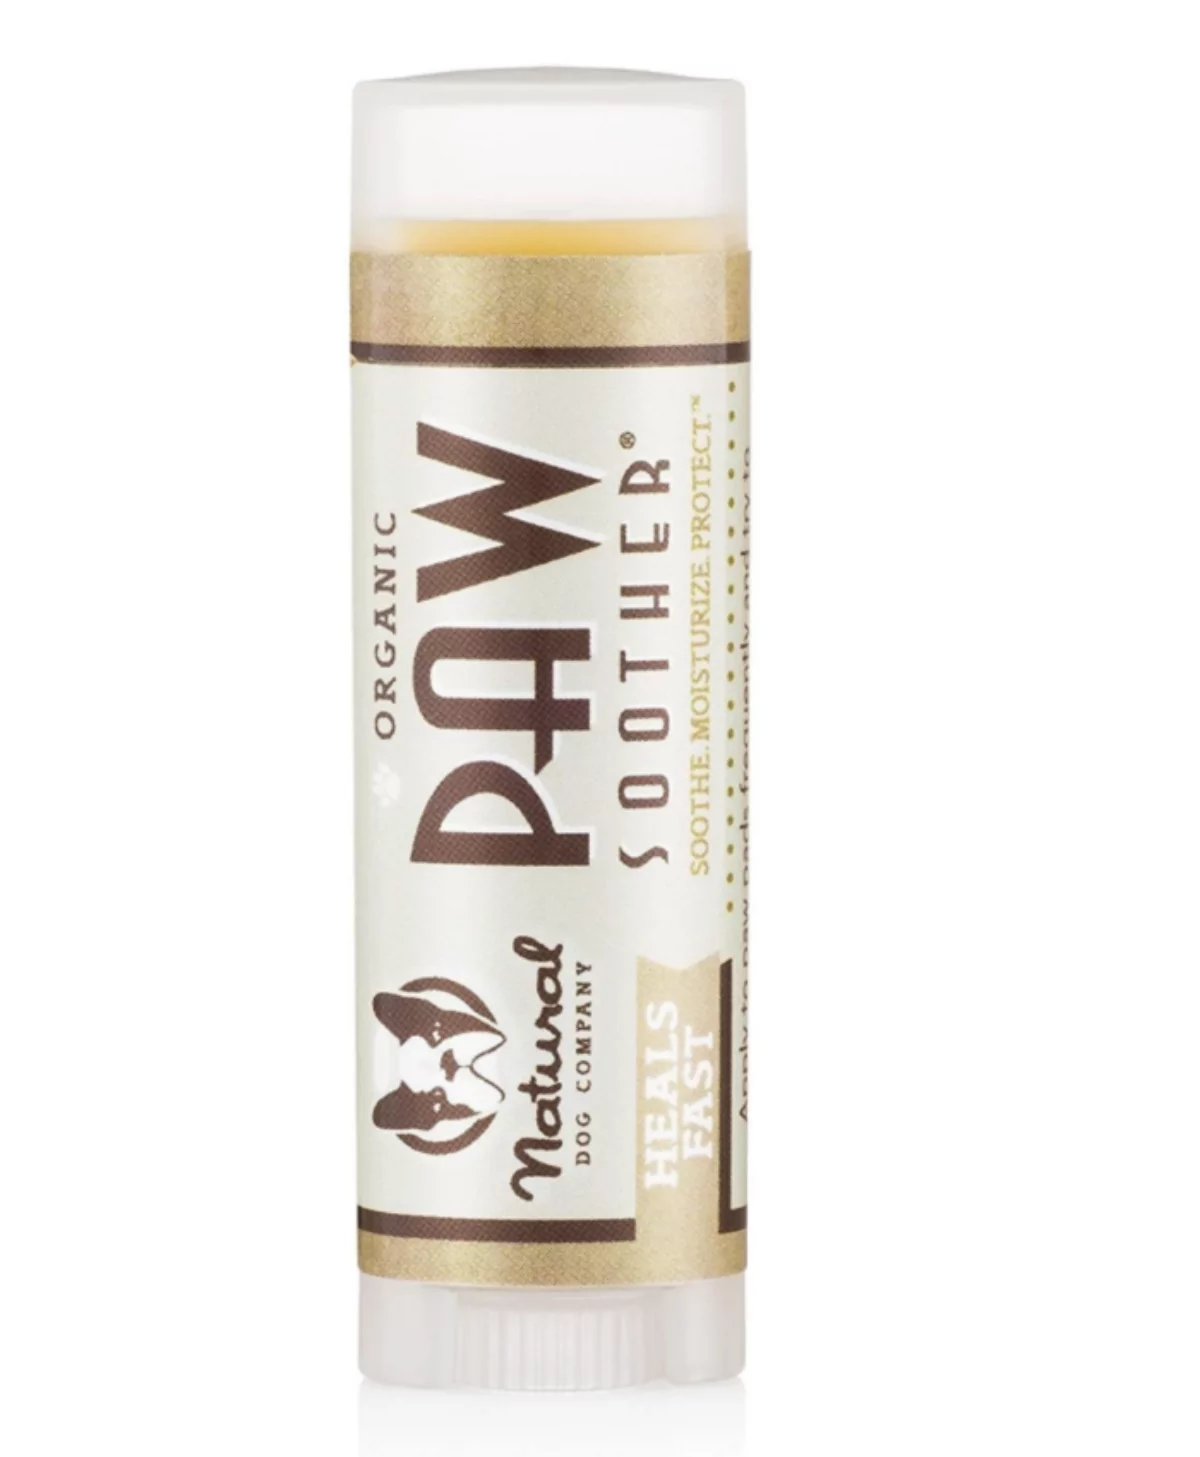 Organic dog paw smoother from natural dog company